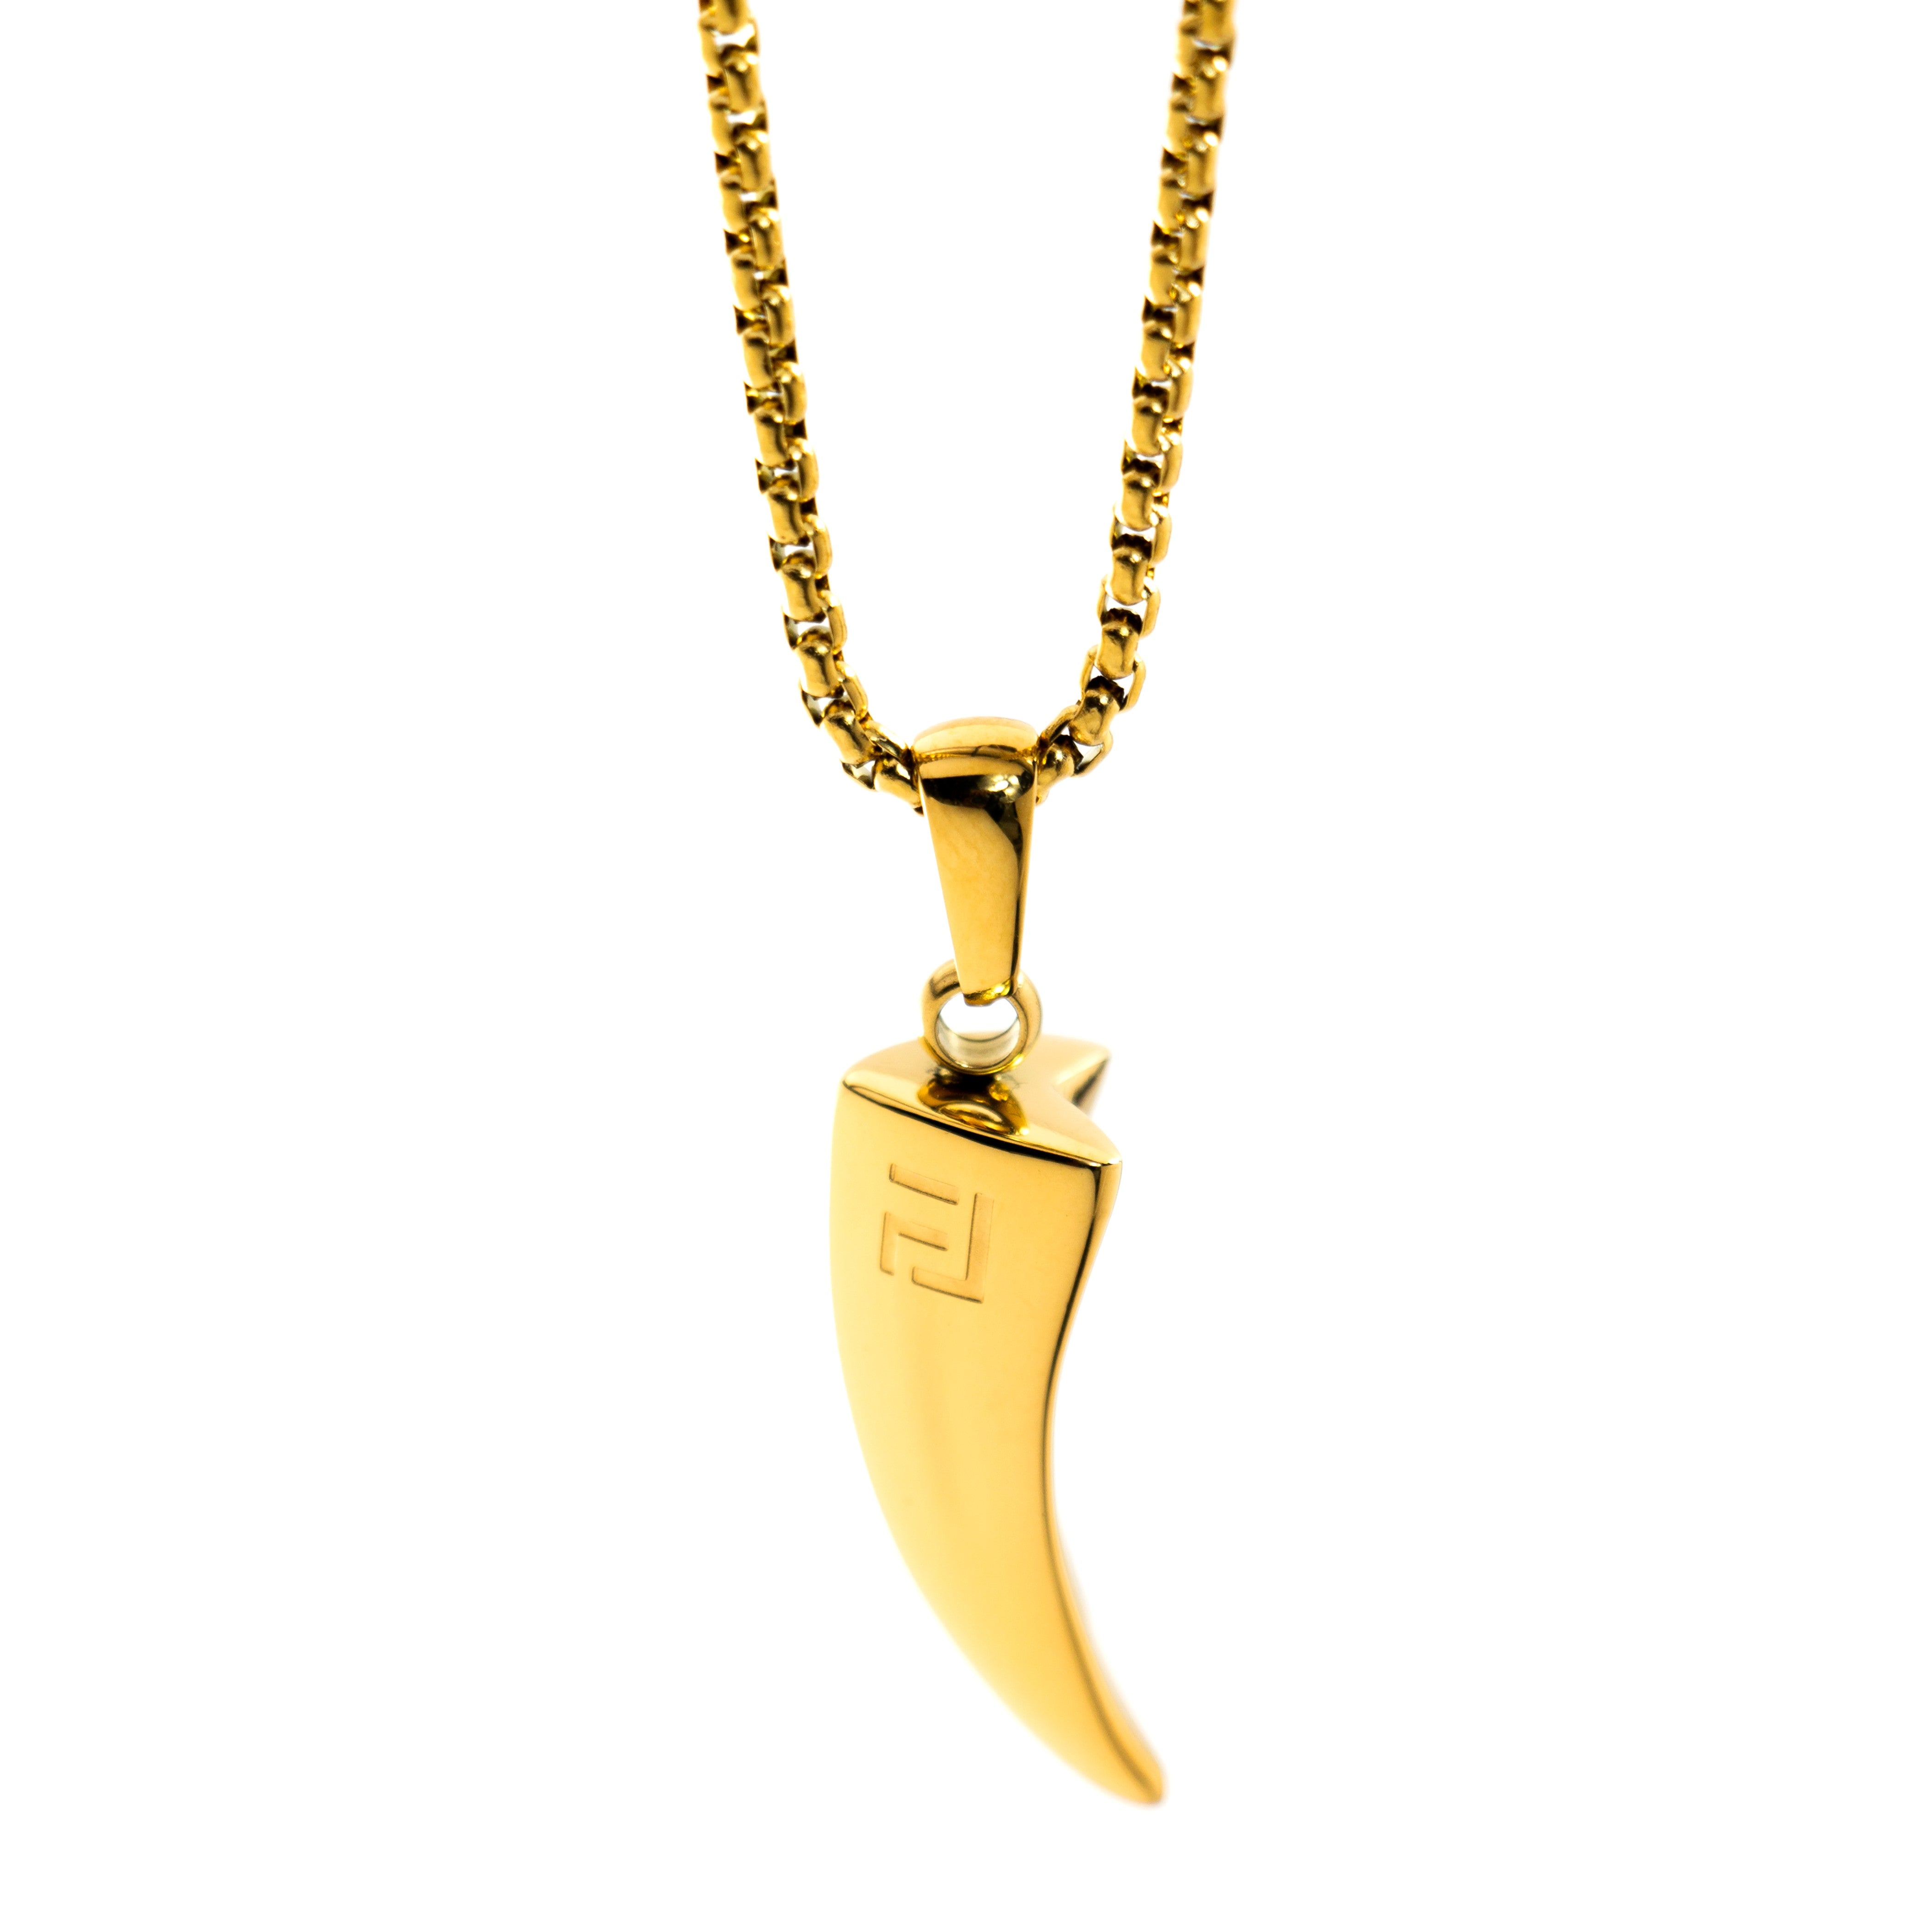 Tiger Claw Necklace in Gold